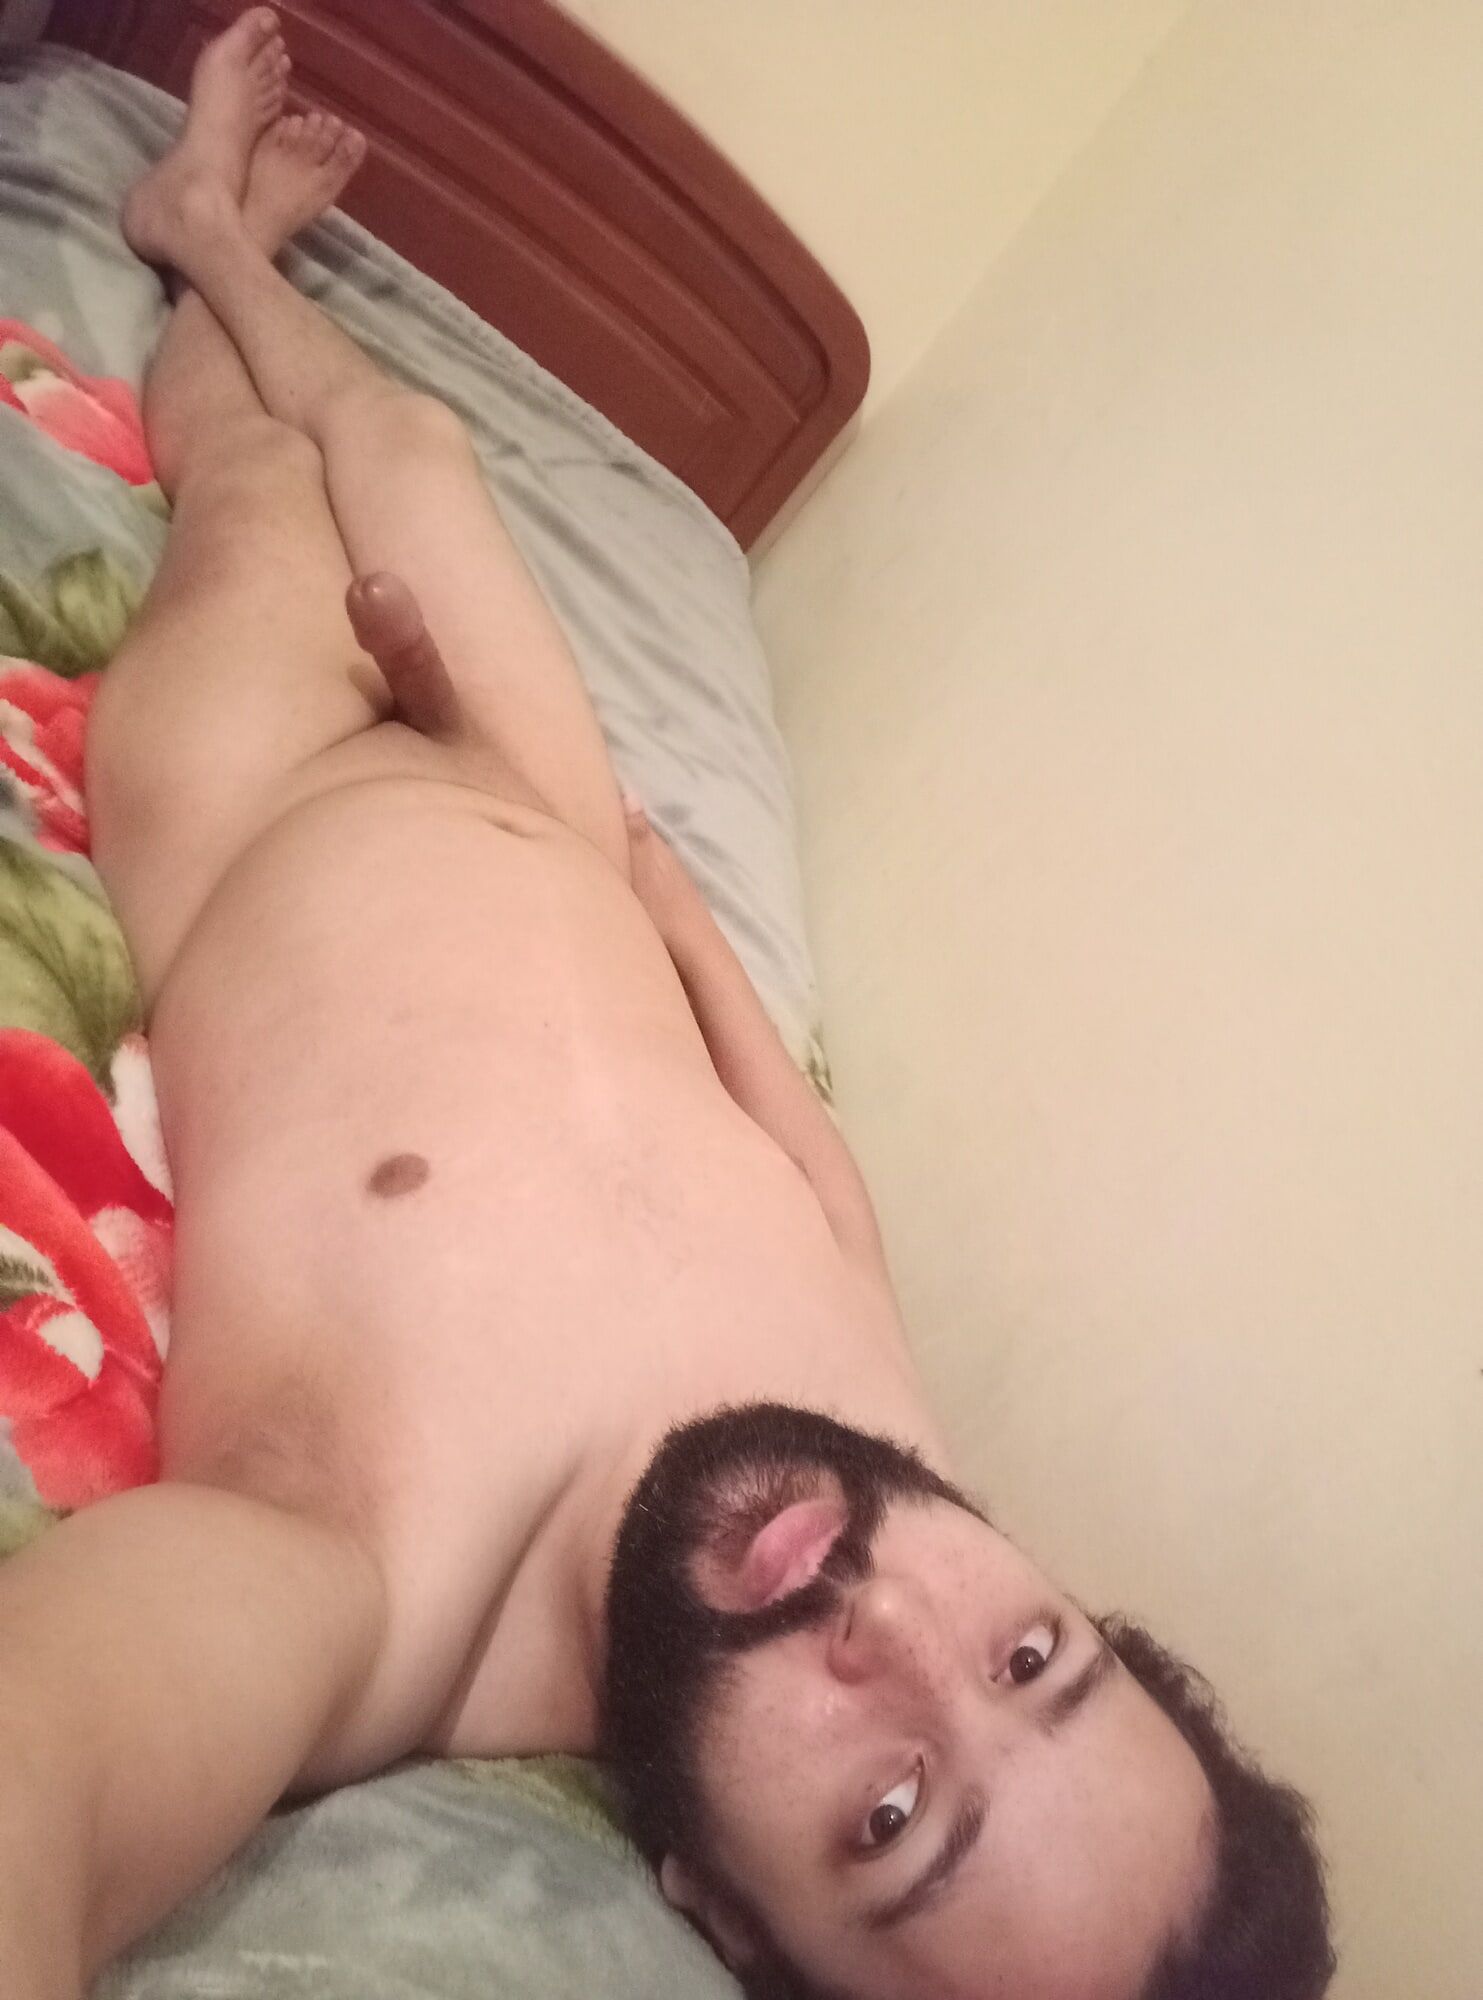 Me naked (2)